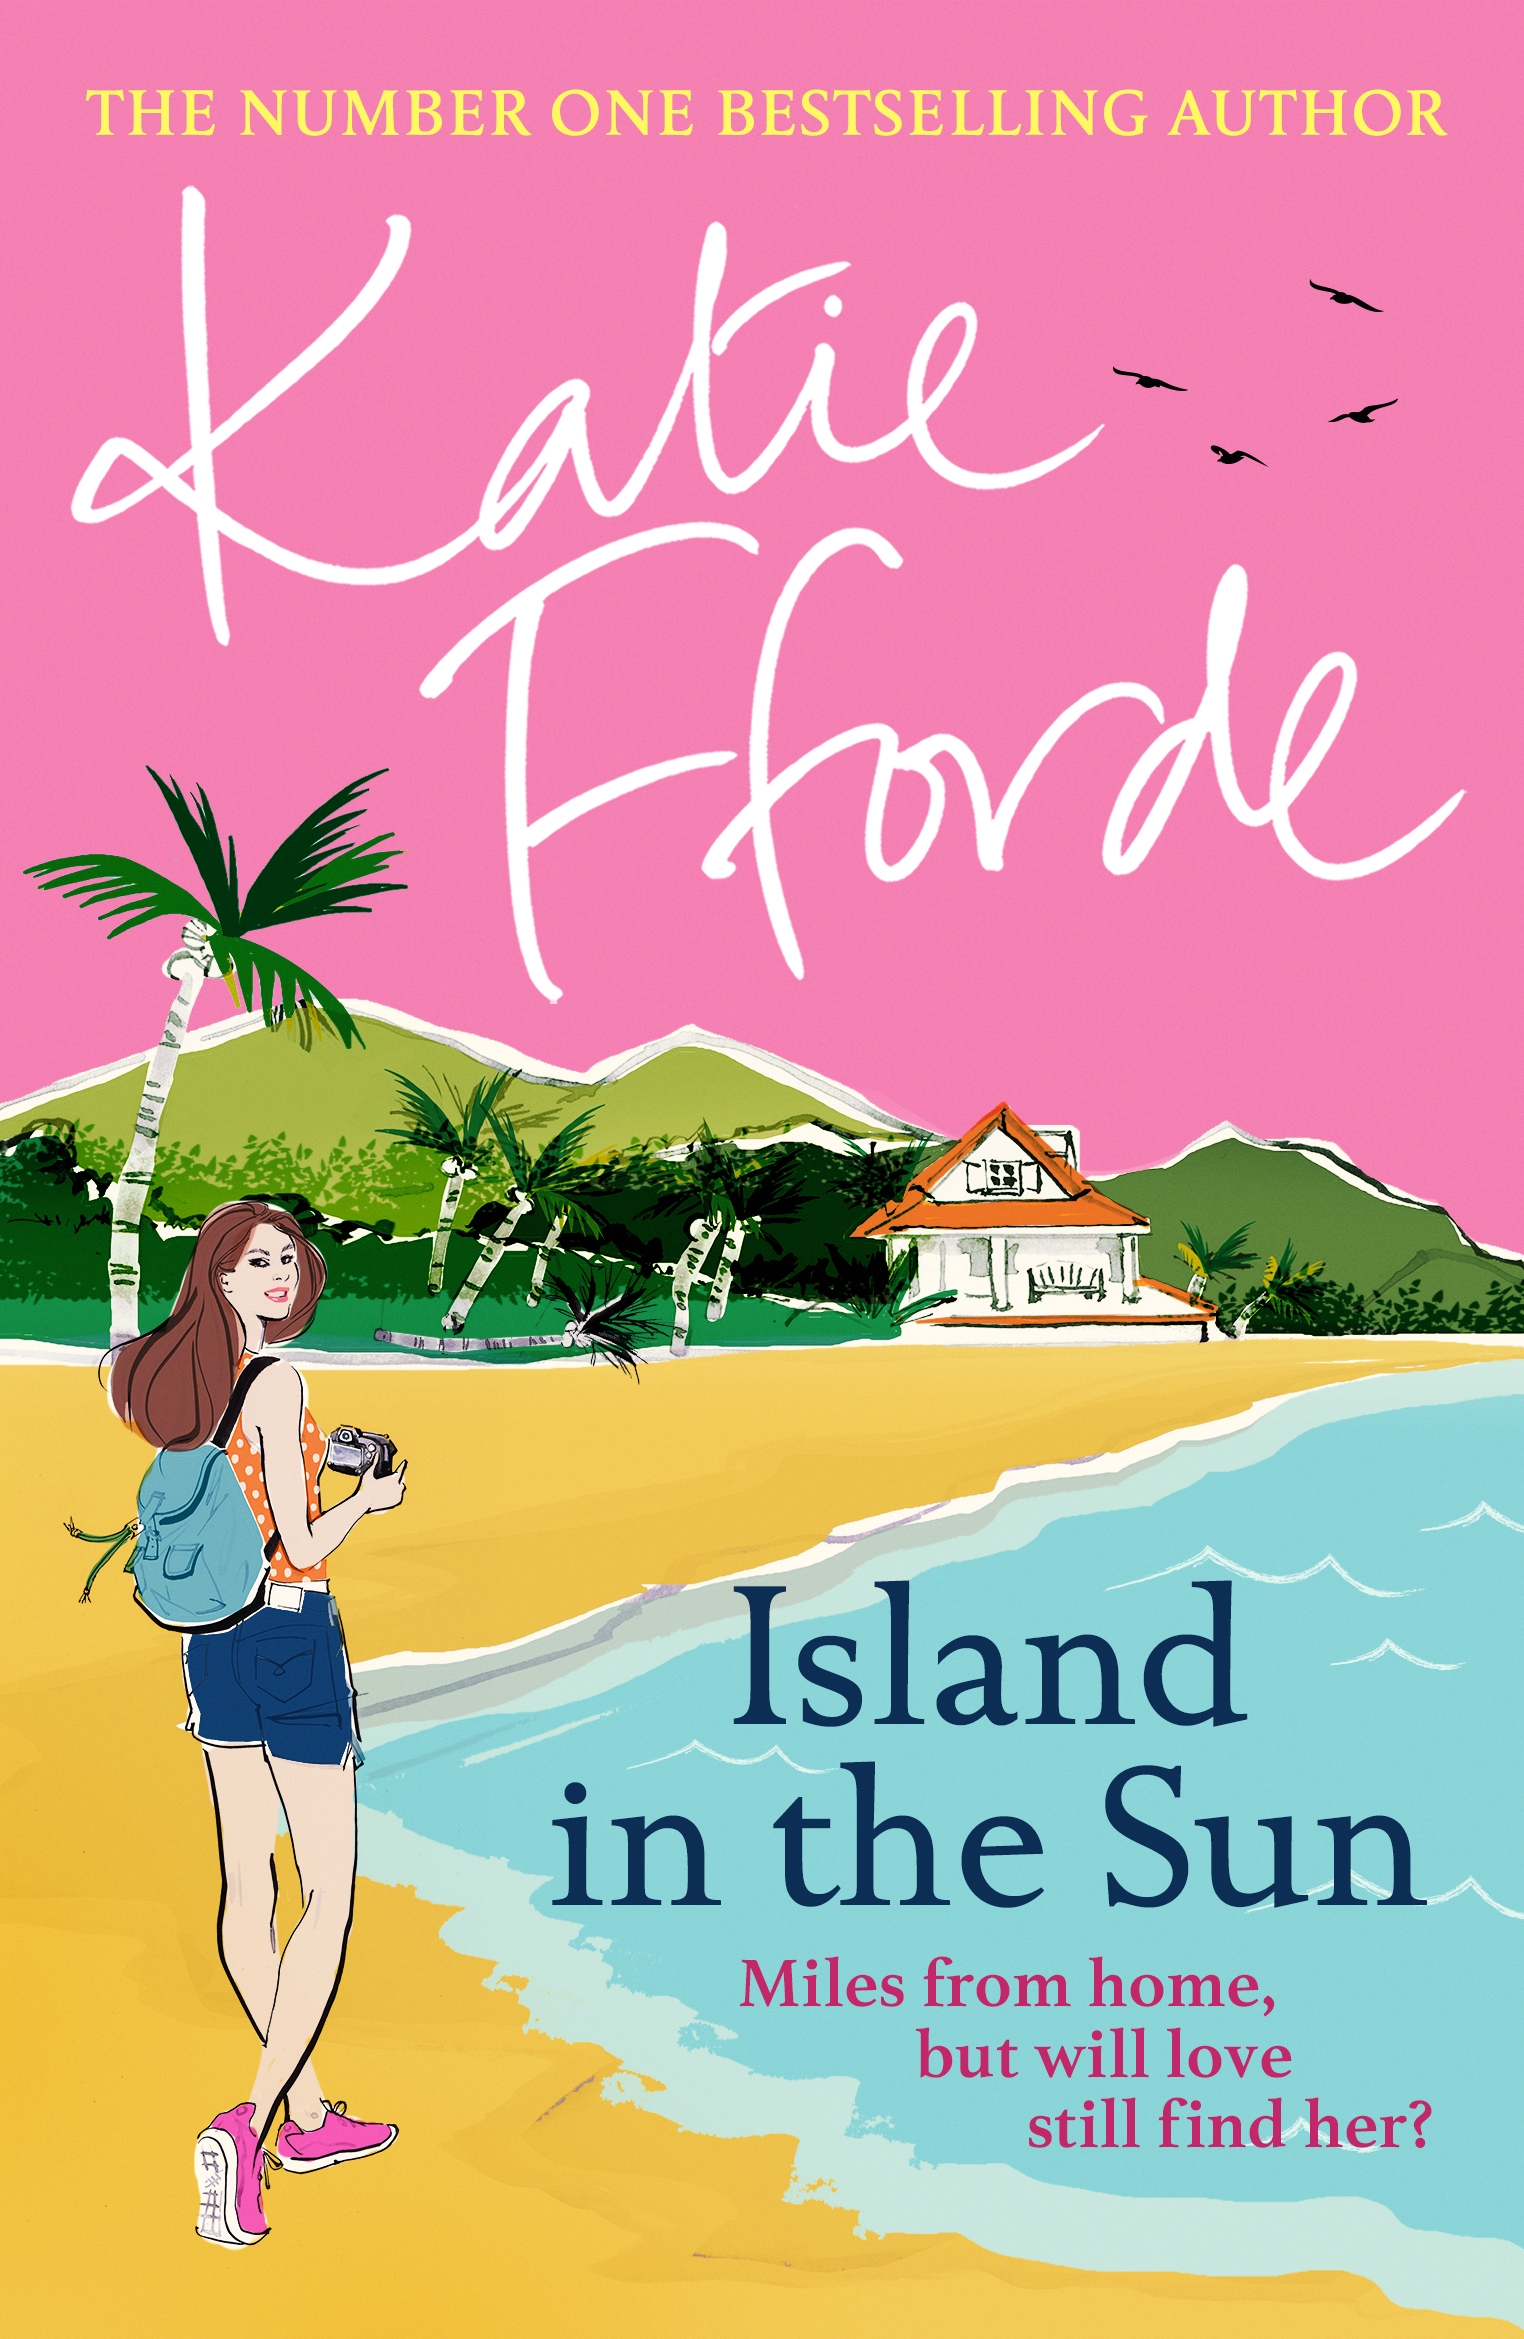 Book jacket of Island In The Sun by Katie Fforde (Century/PA)